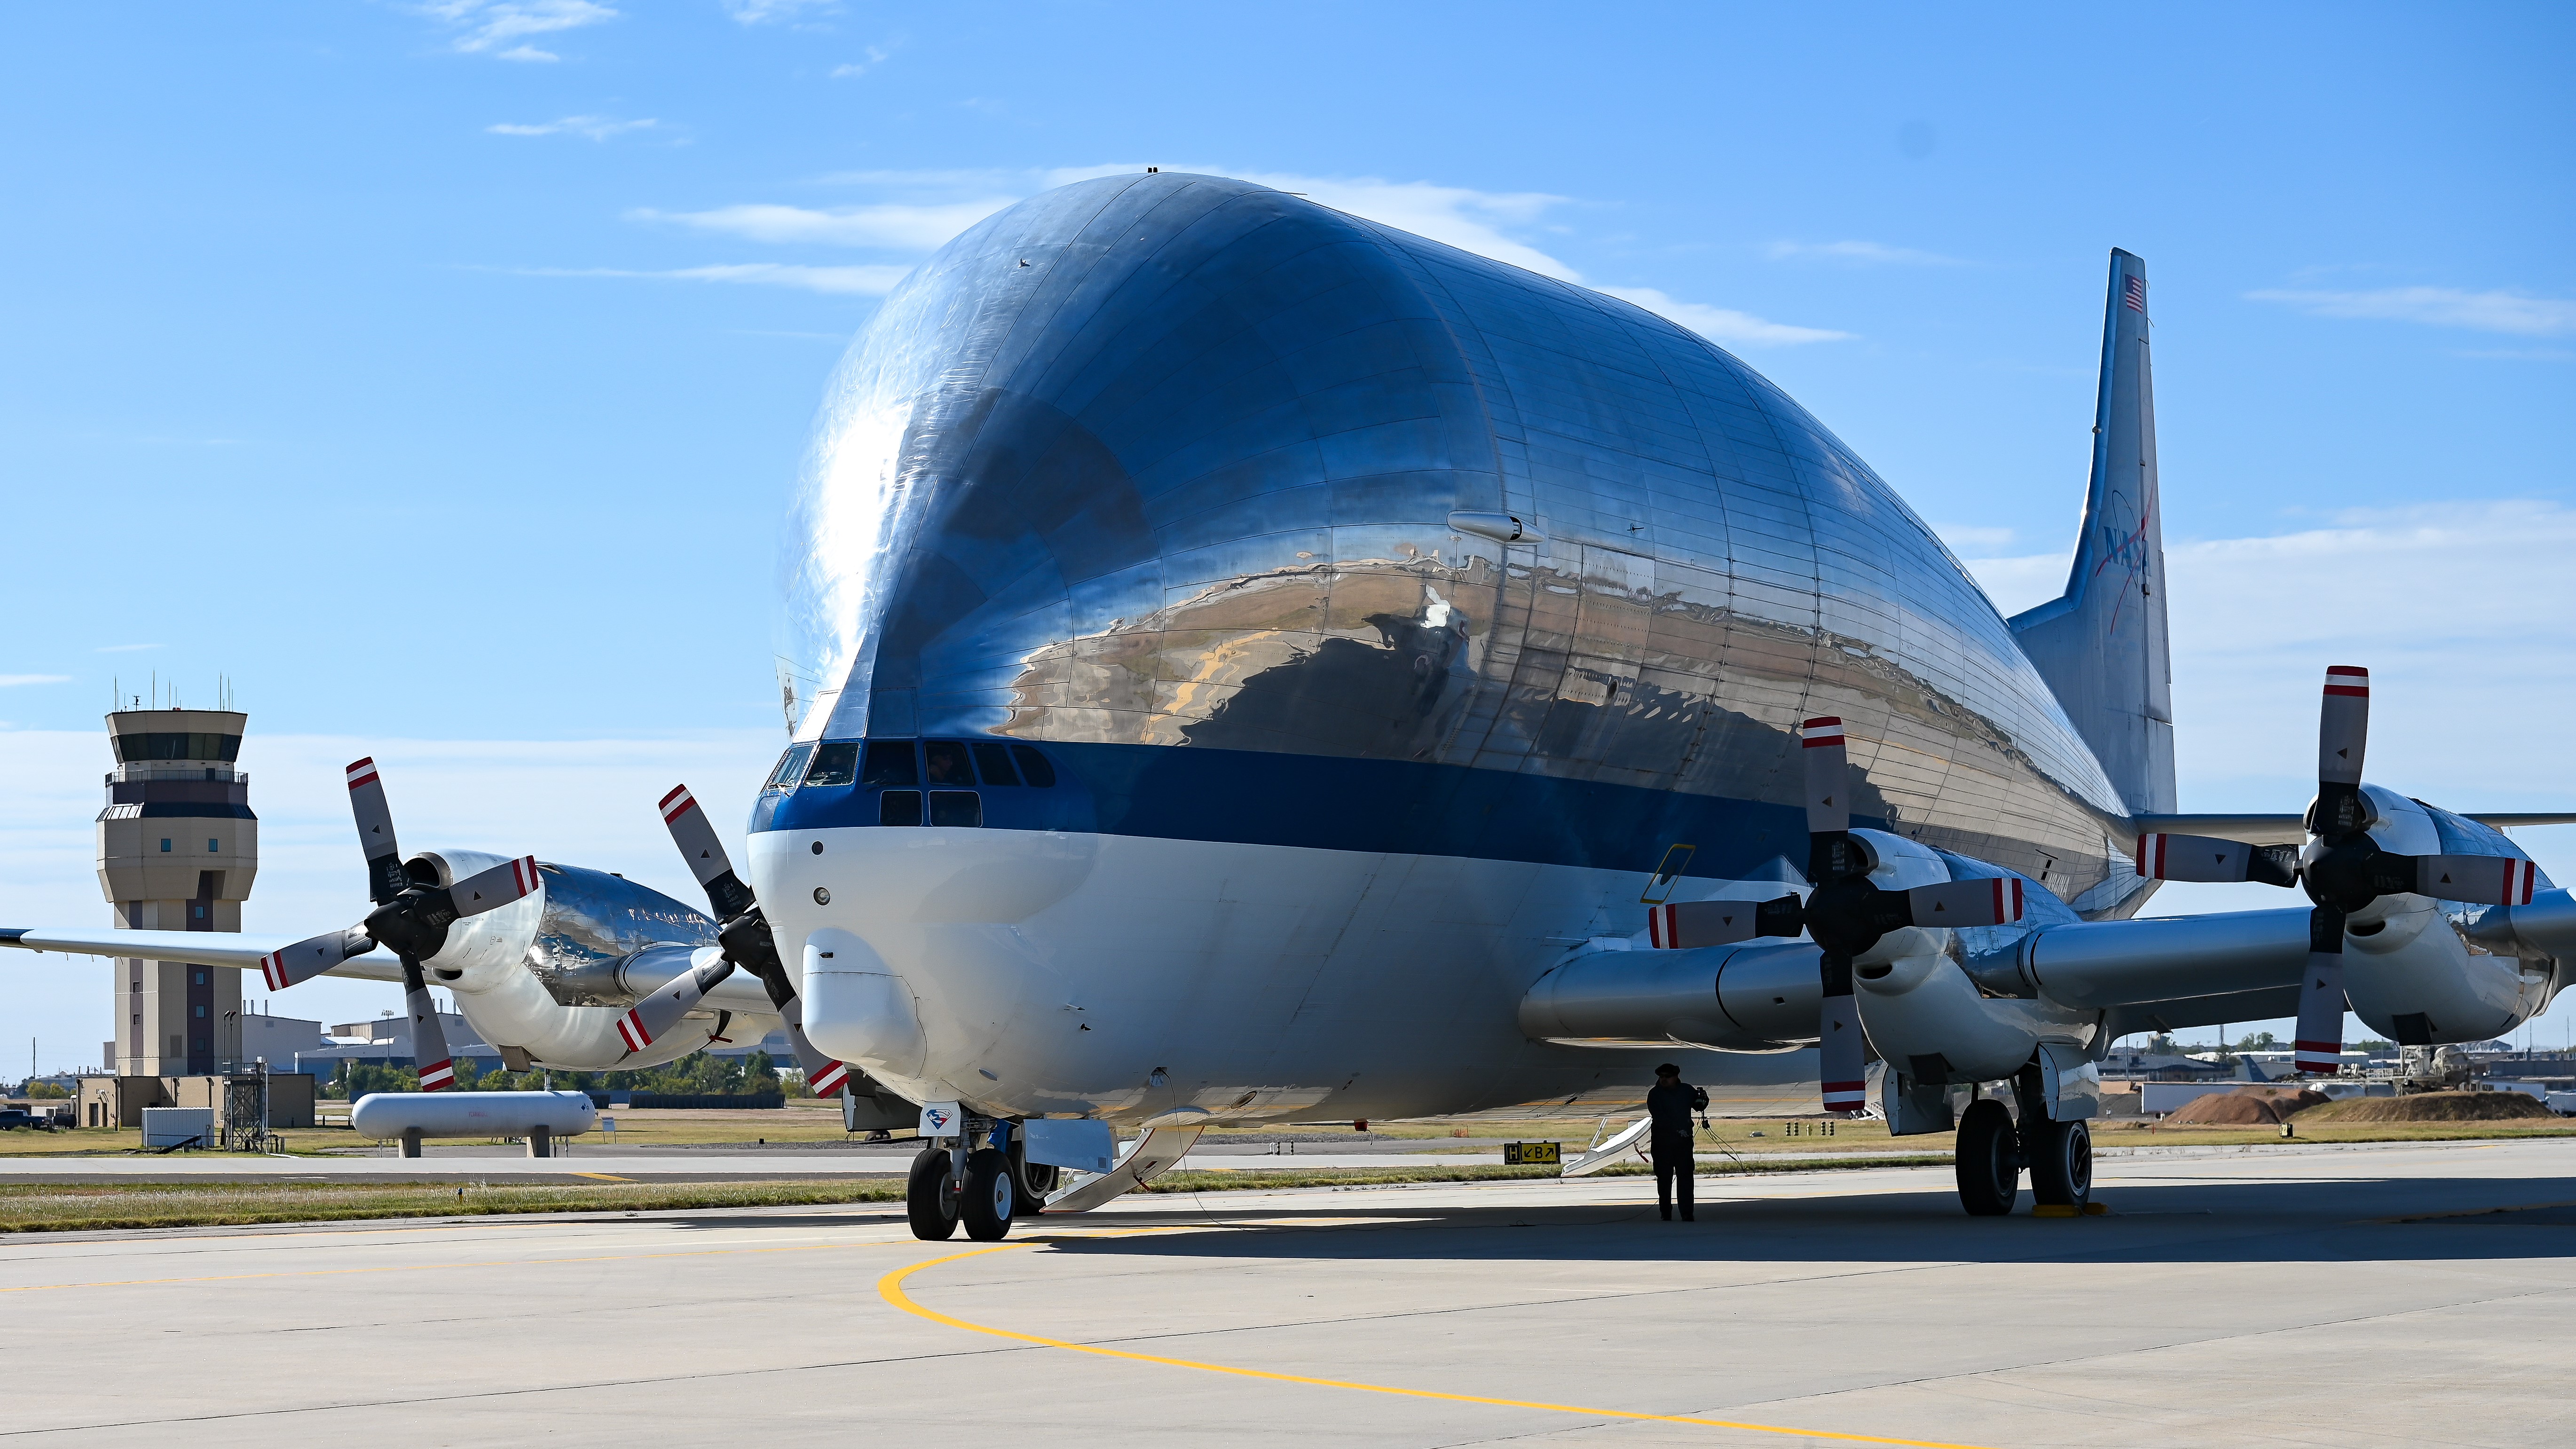 Super Guppy aircraft parked on the ramp